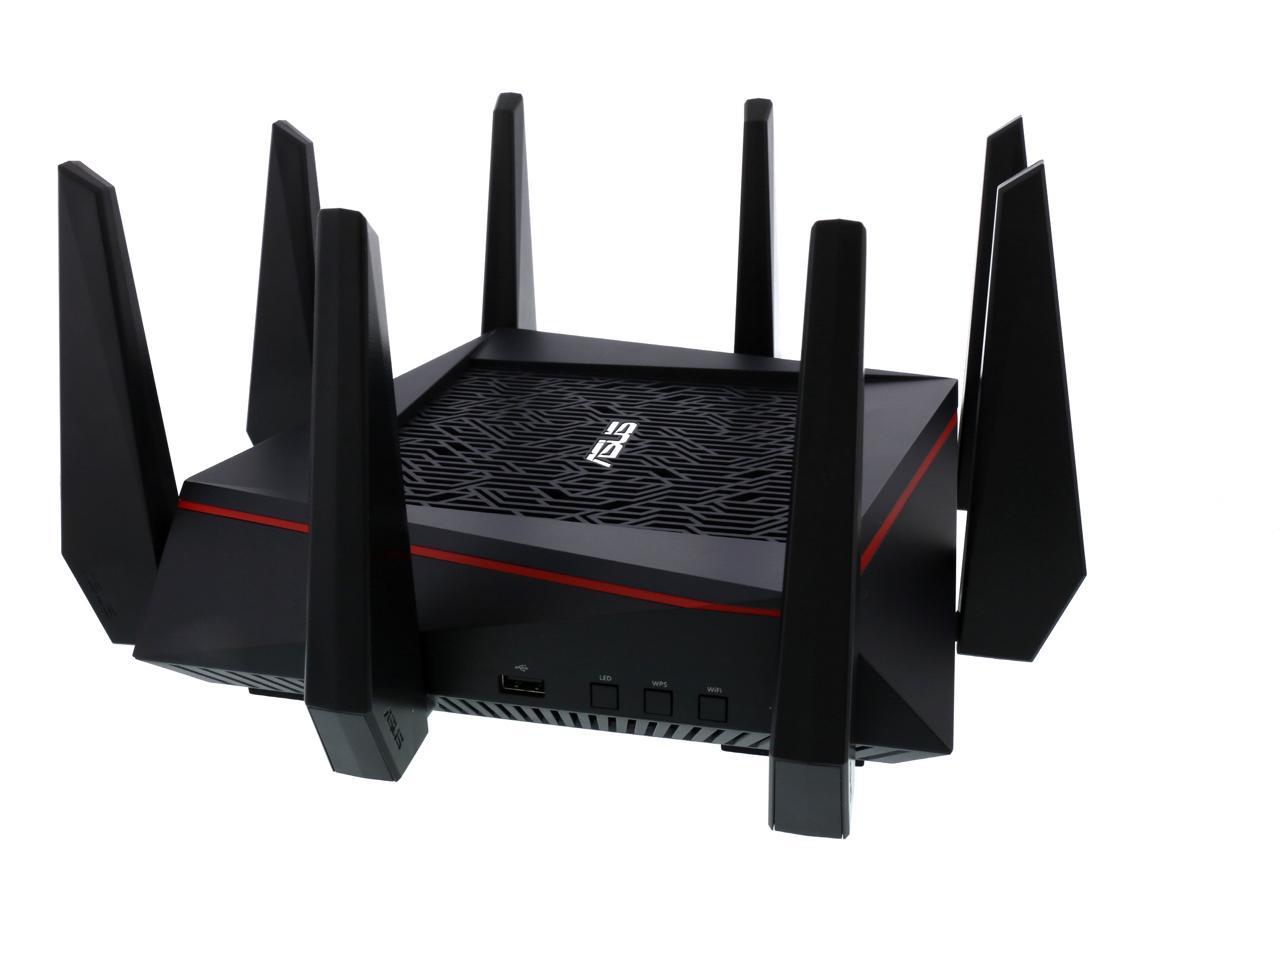 ASUS AC5300 WiFi Triband Gigabit Wireless Router